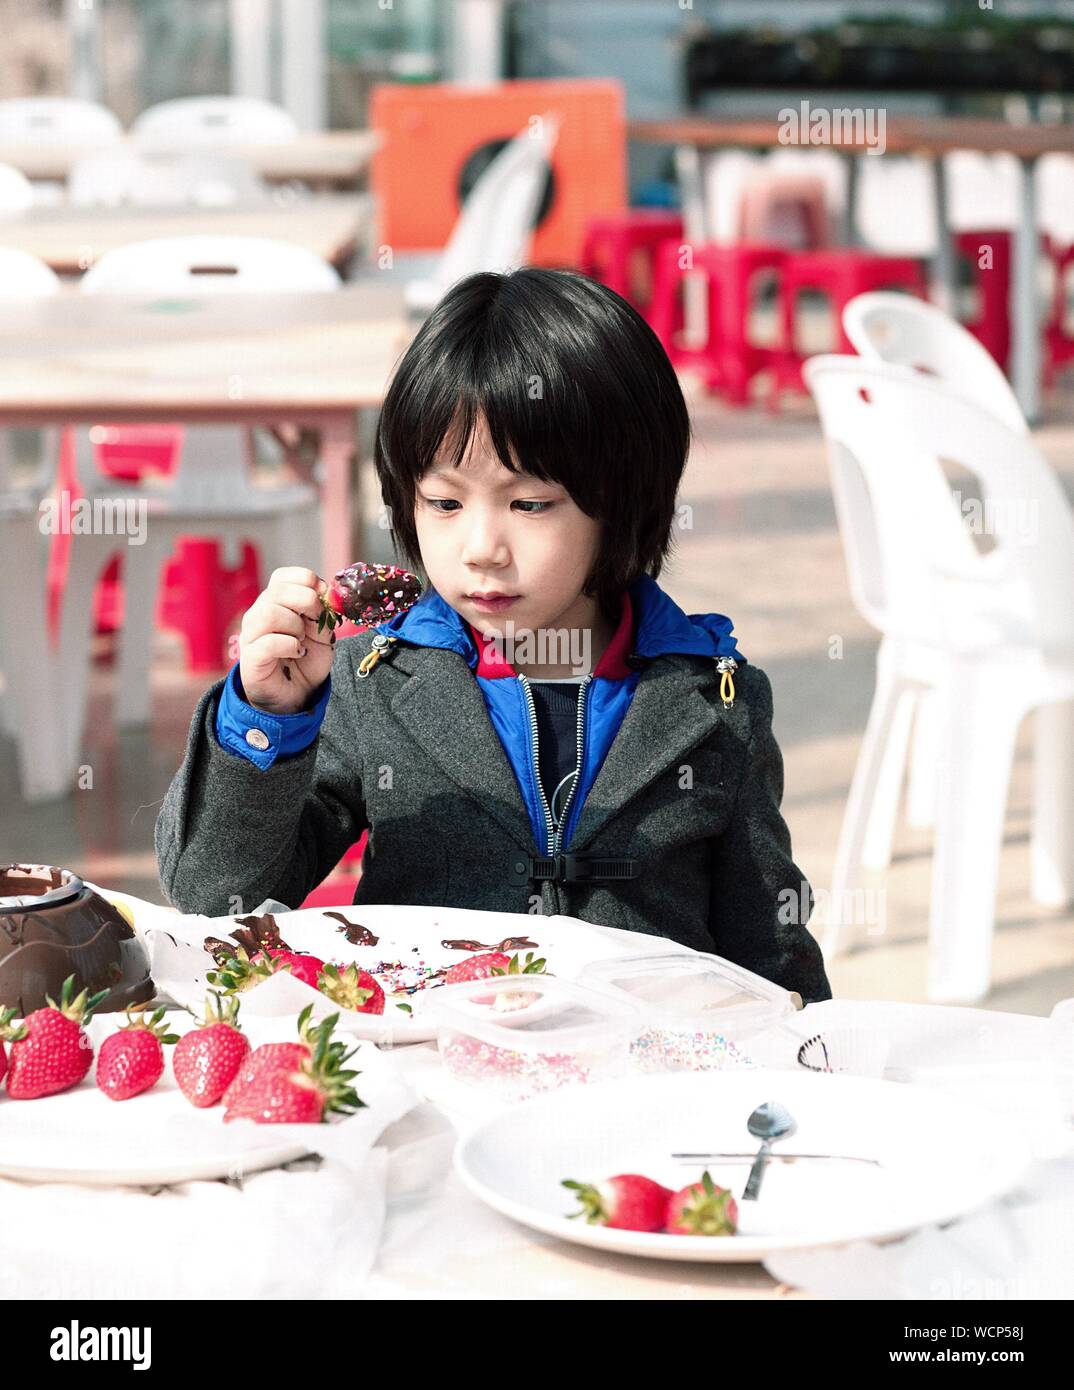 Young Child Holding Chocolate Covered Strawberry At Table Stock Photo